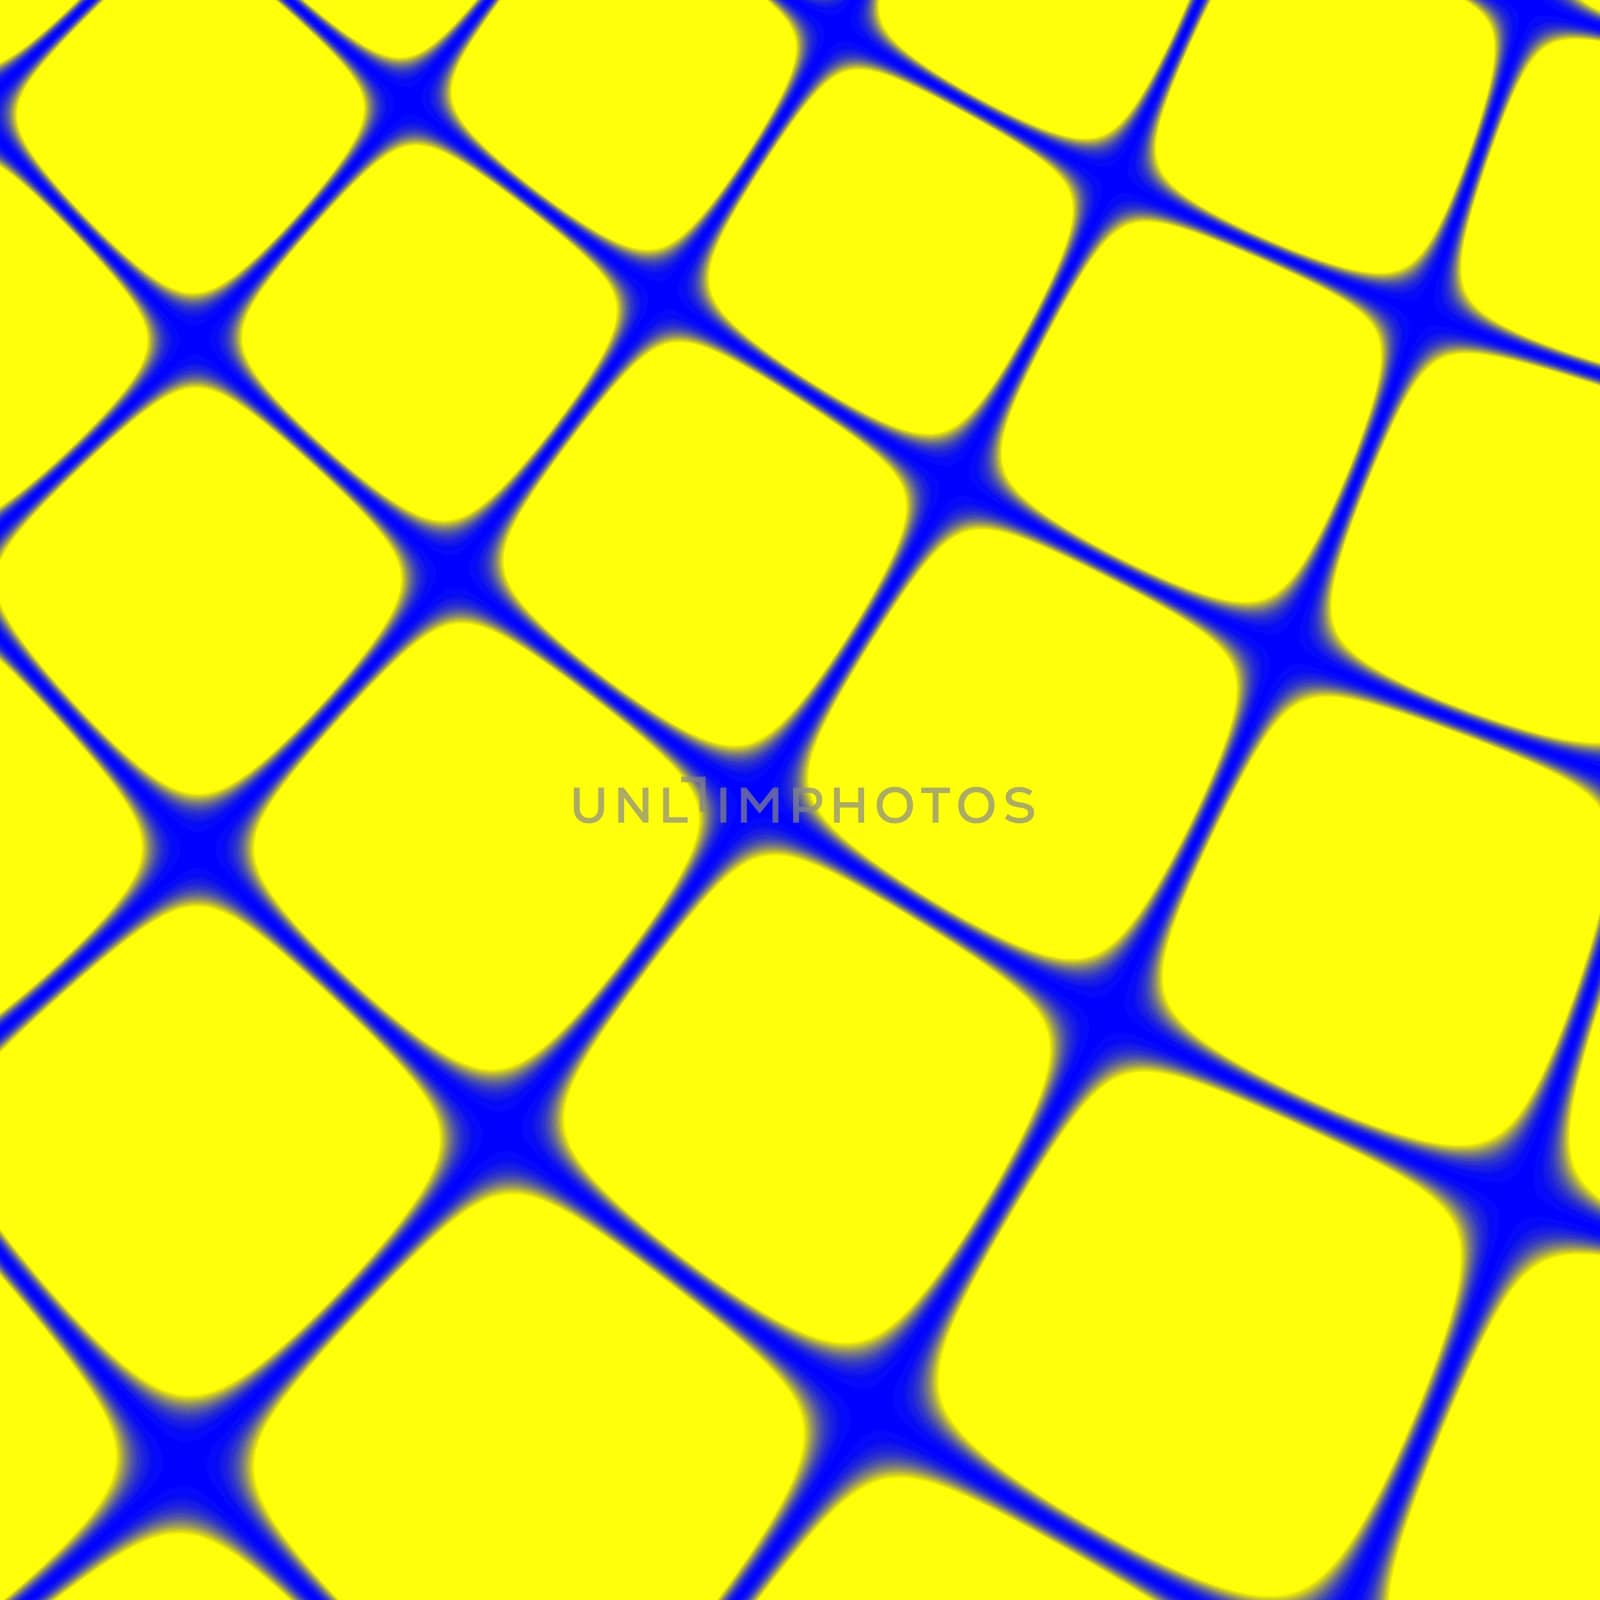 Abstract blue & yellow fractal grid background by klinok